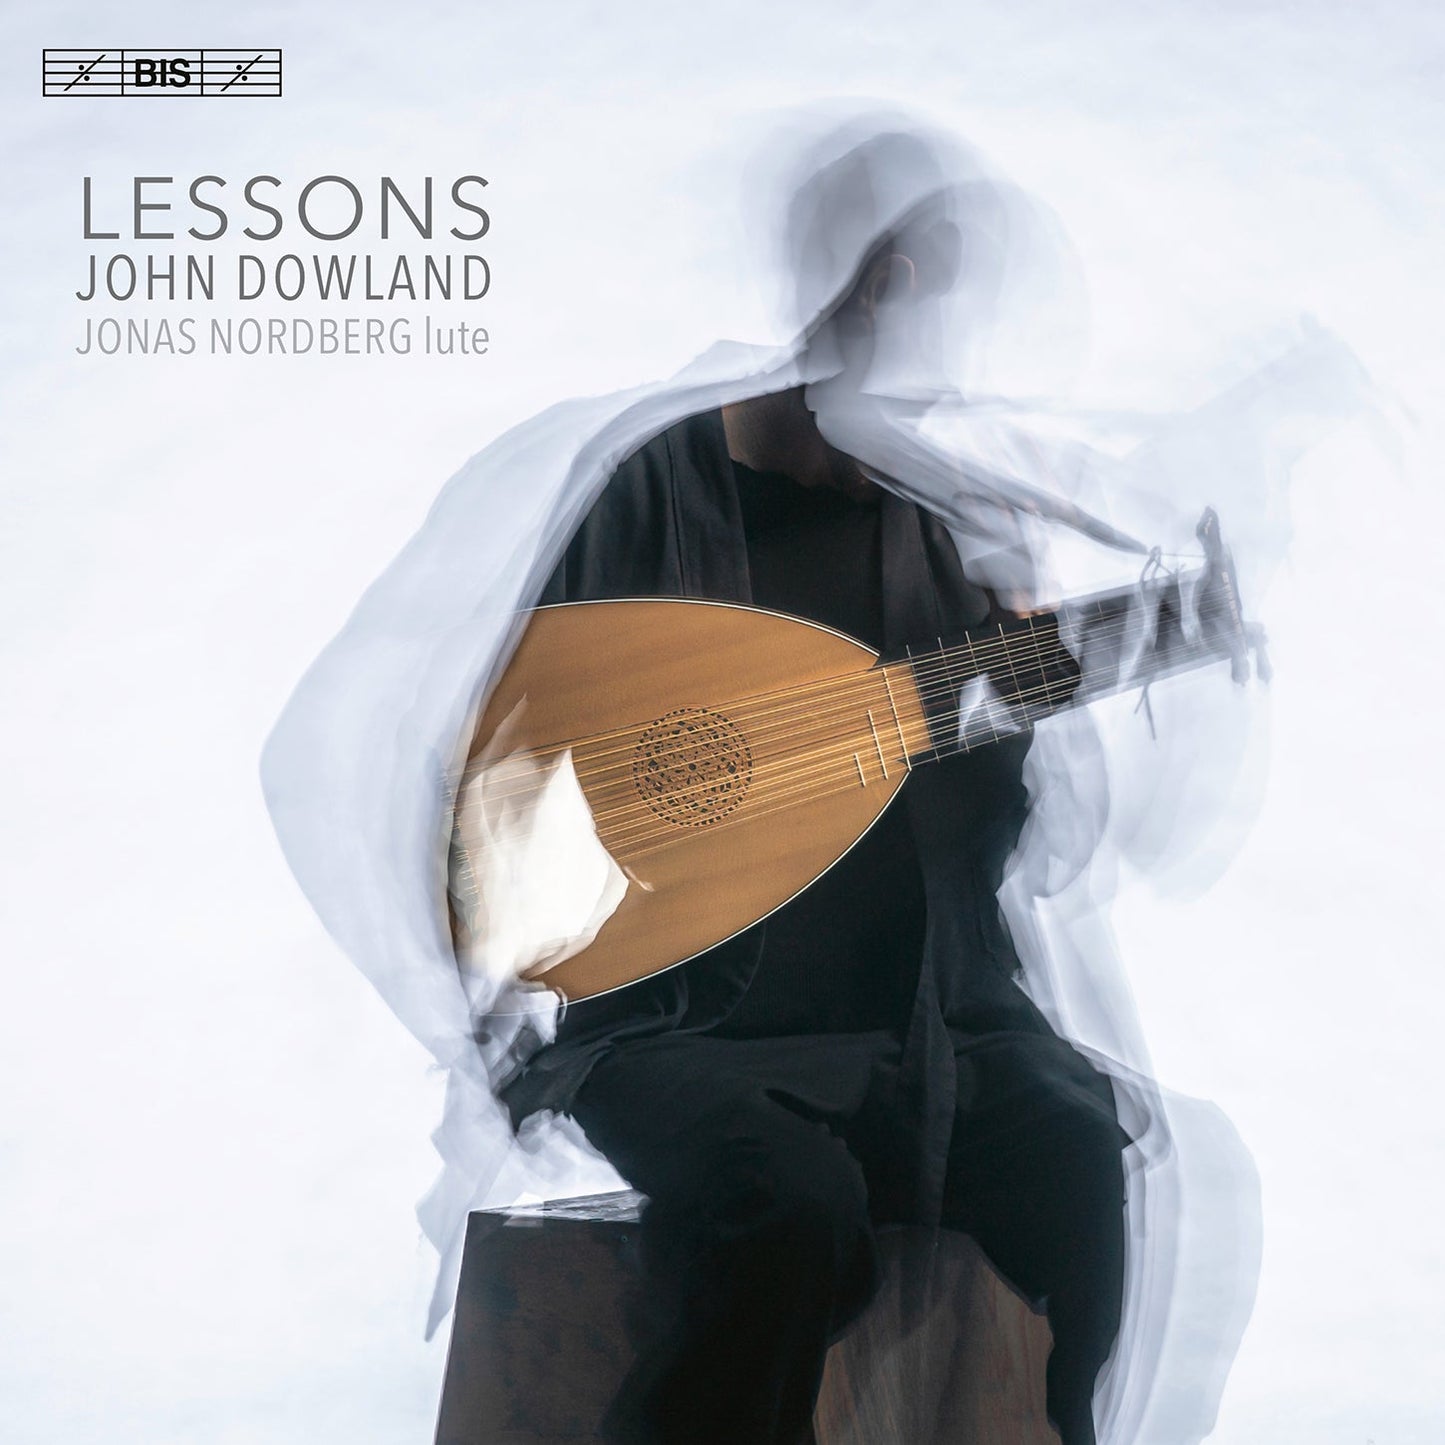 Dowland: Lessons - Lute Music